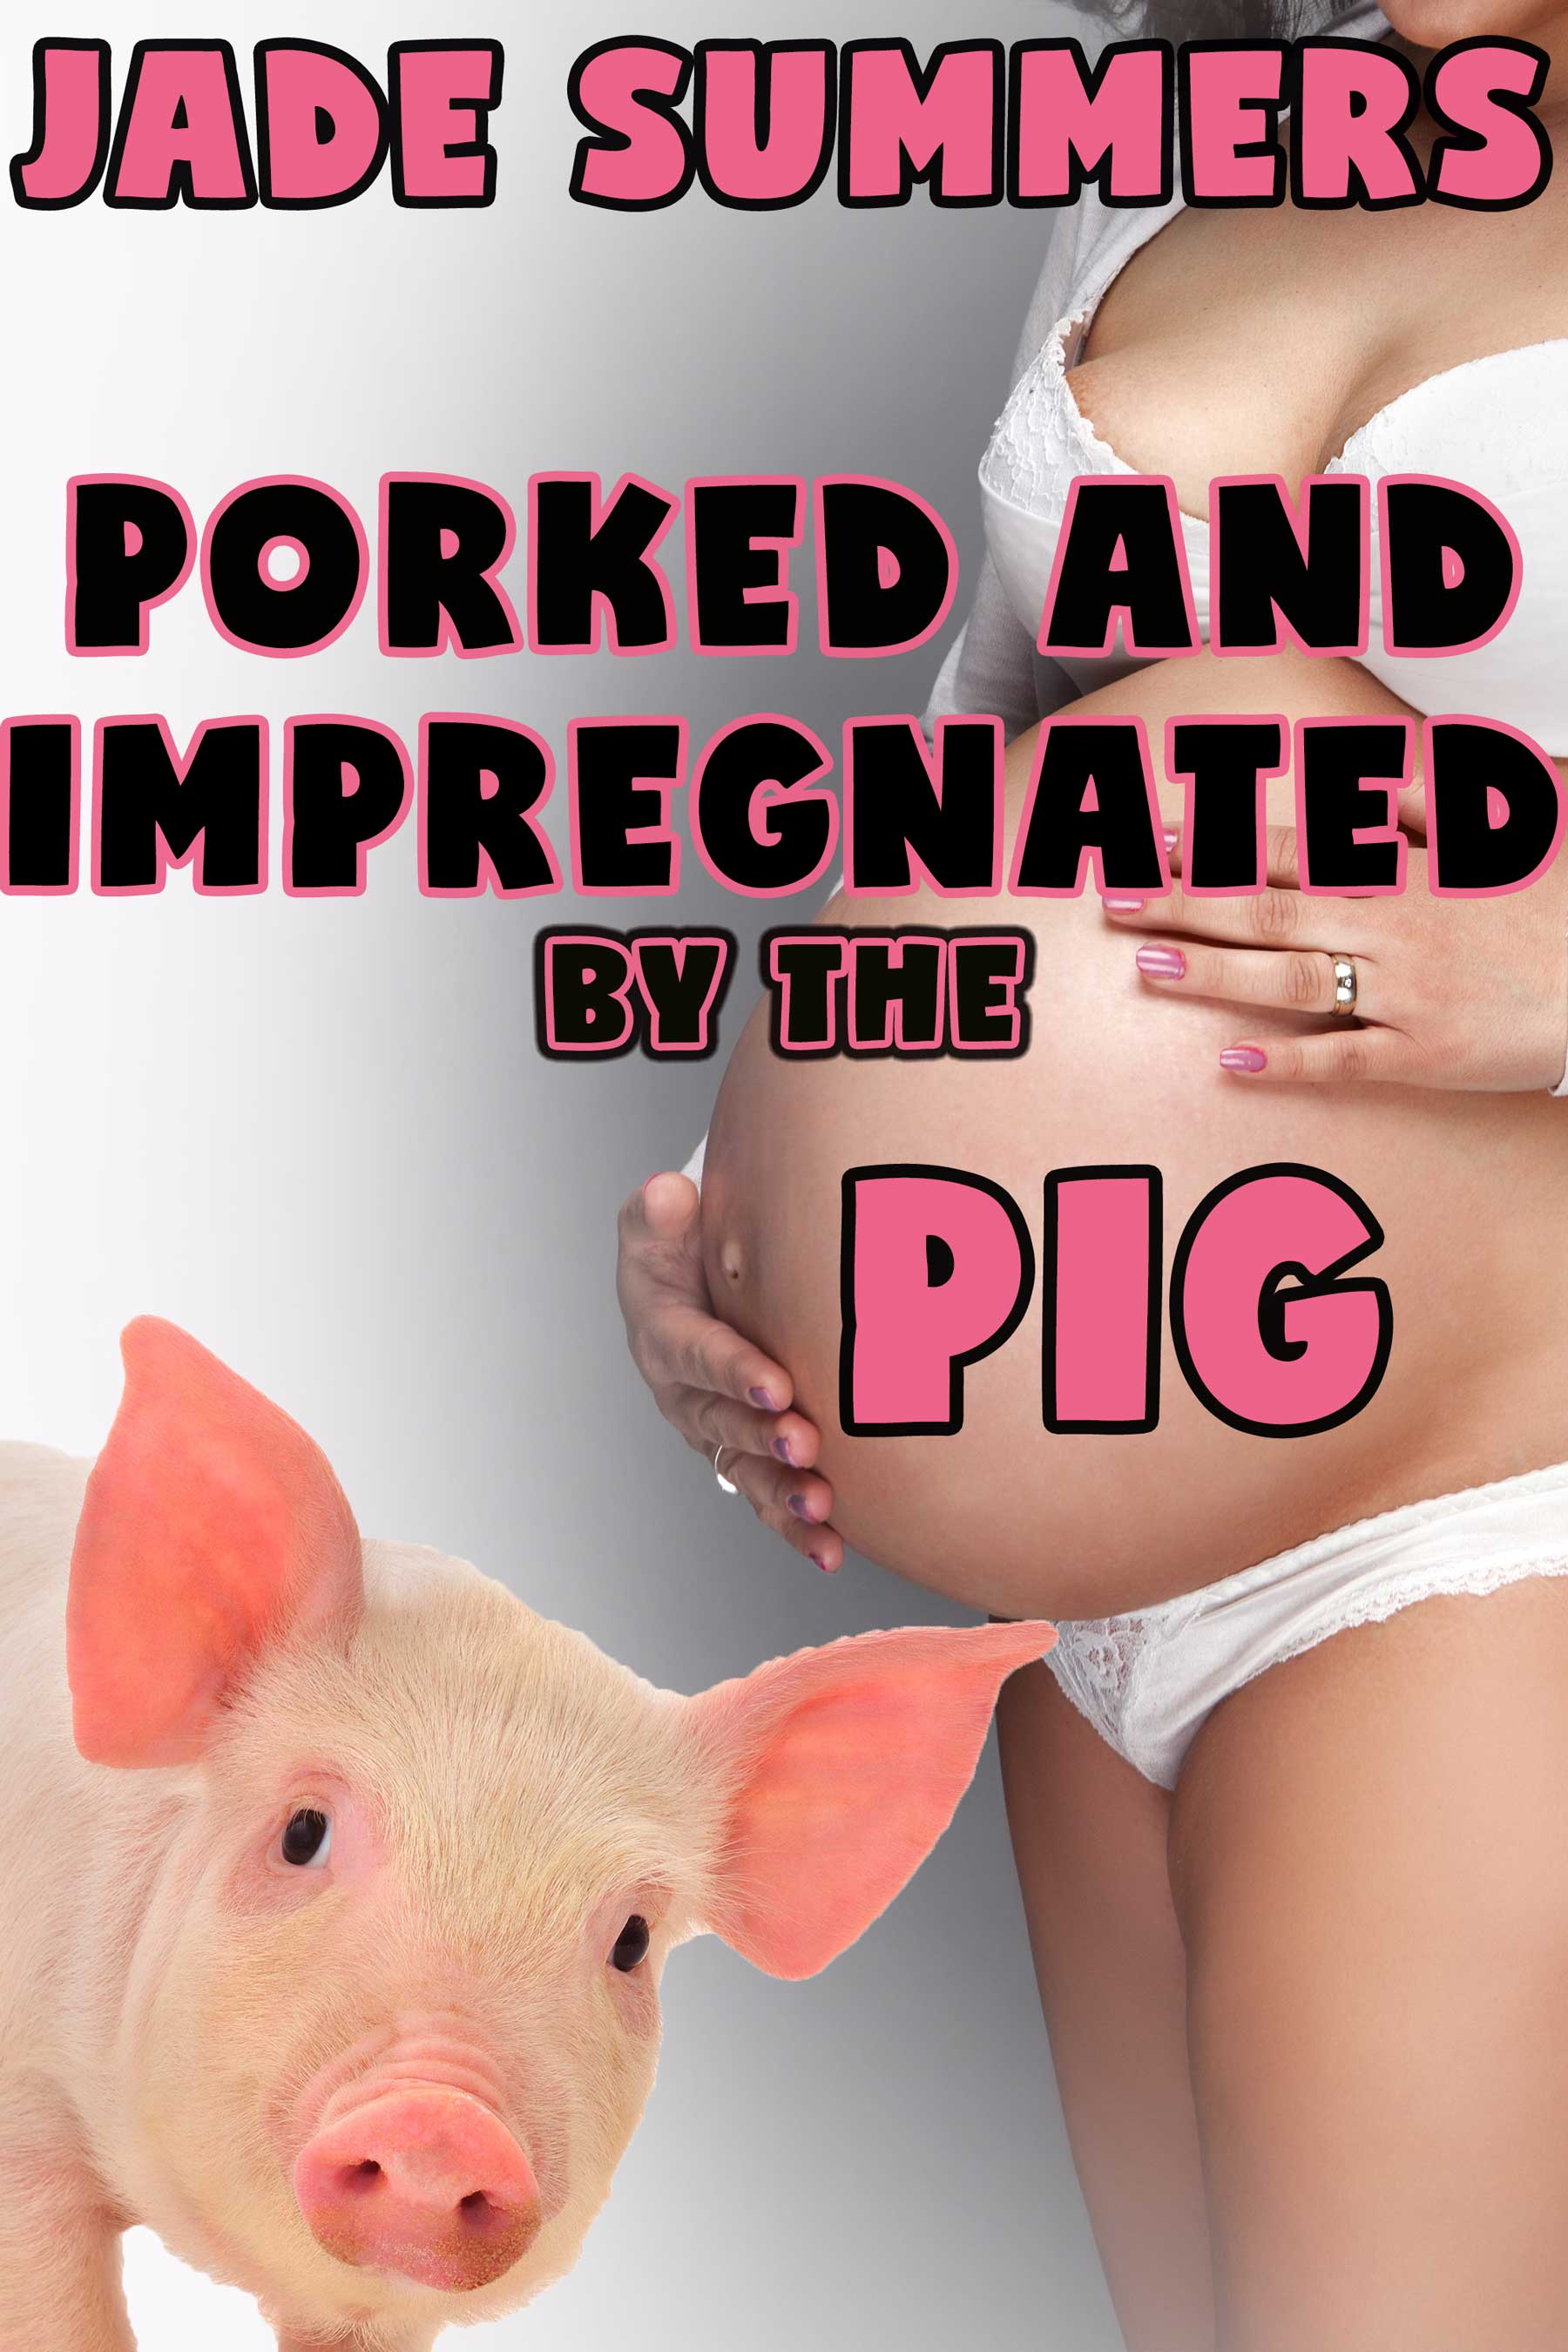 Smashwords â€“ Porked and Impregnated by the Pig â€“ a book by Jade Summers